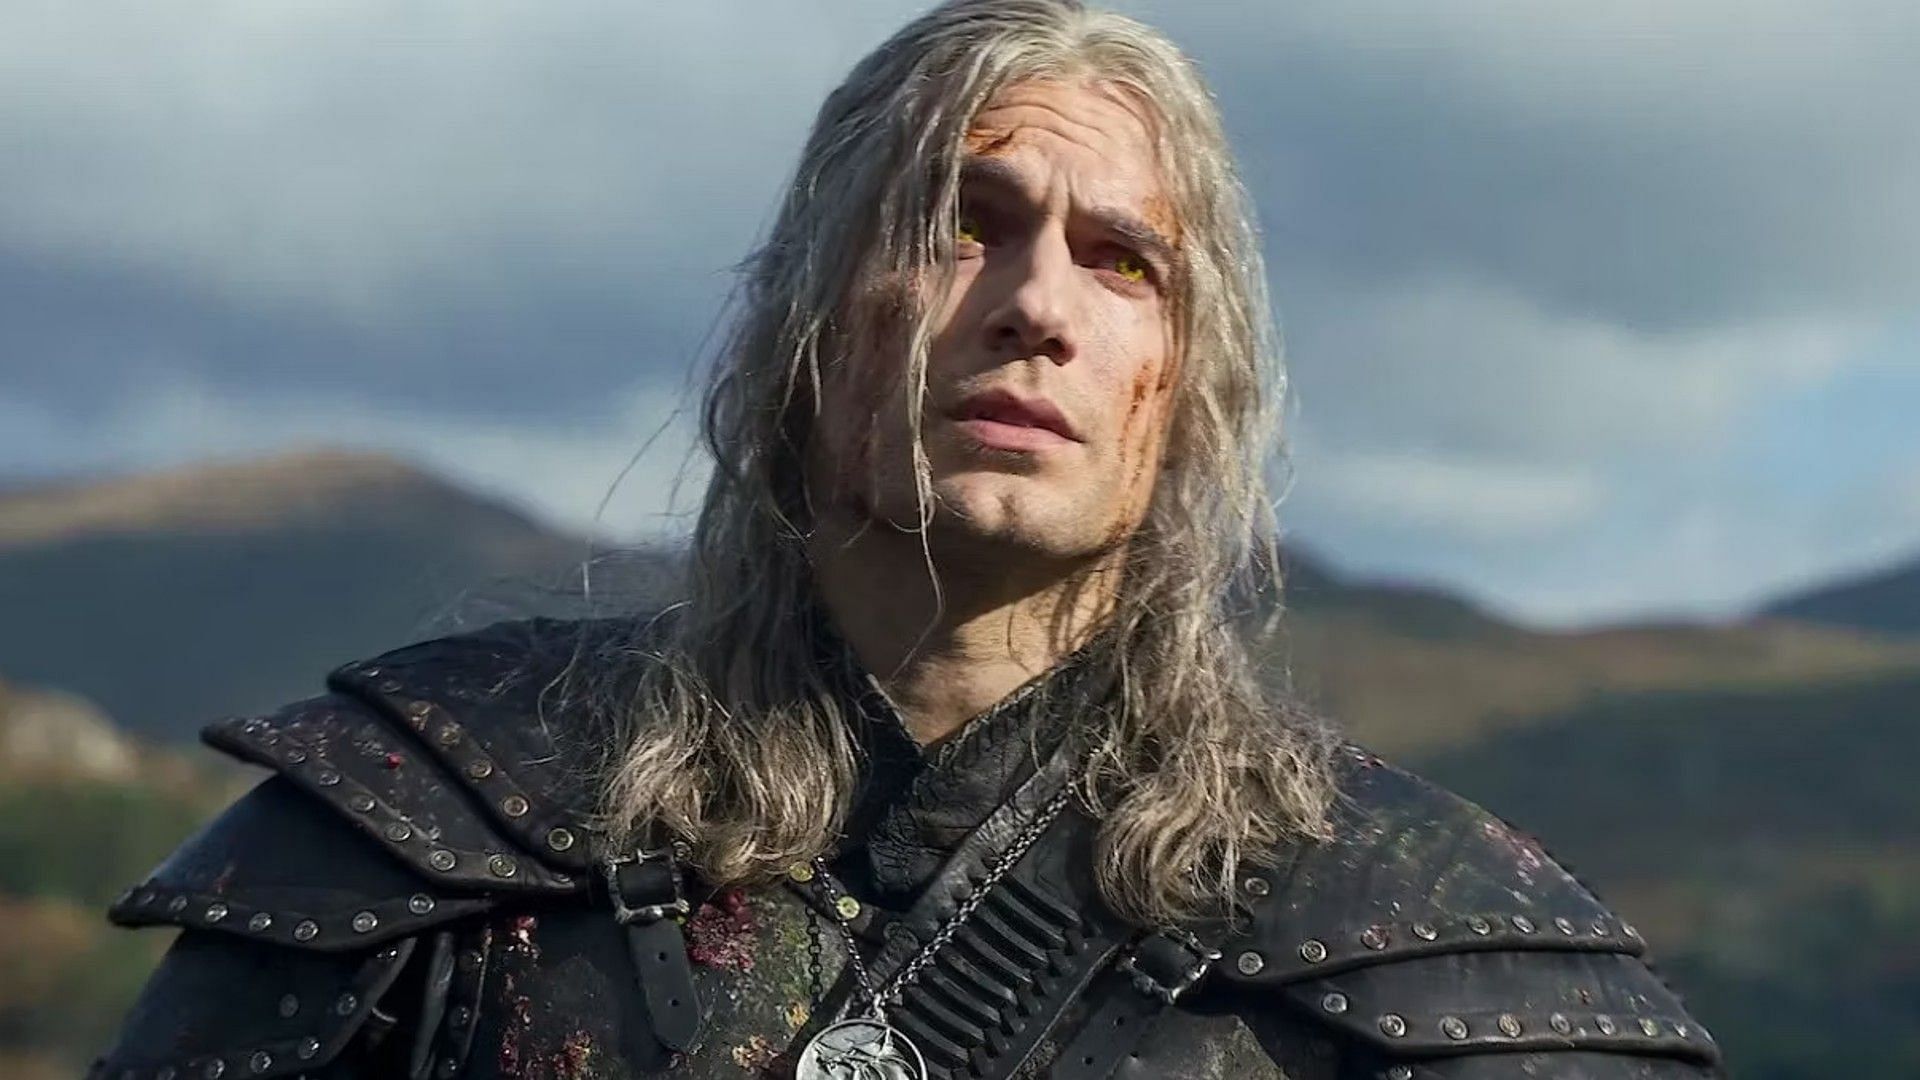 Geralt of Rivia in The Witcher (image via Netflix)